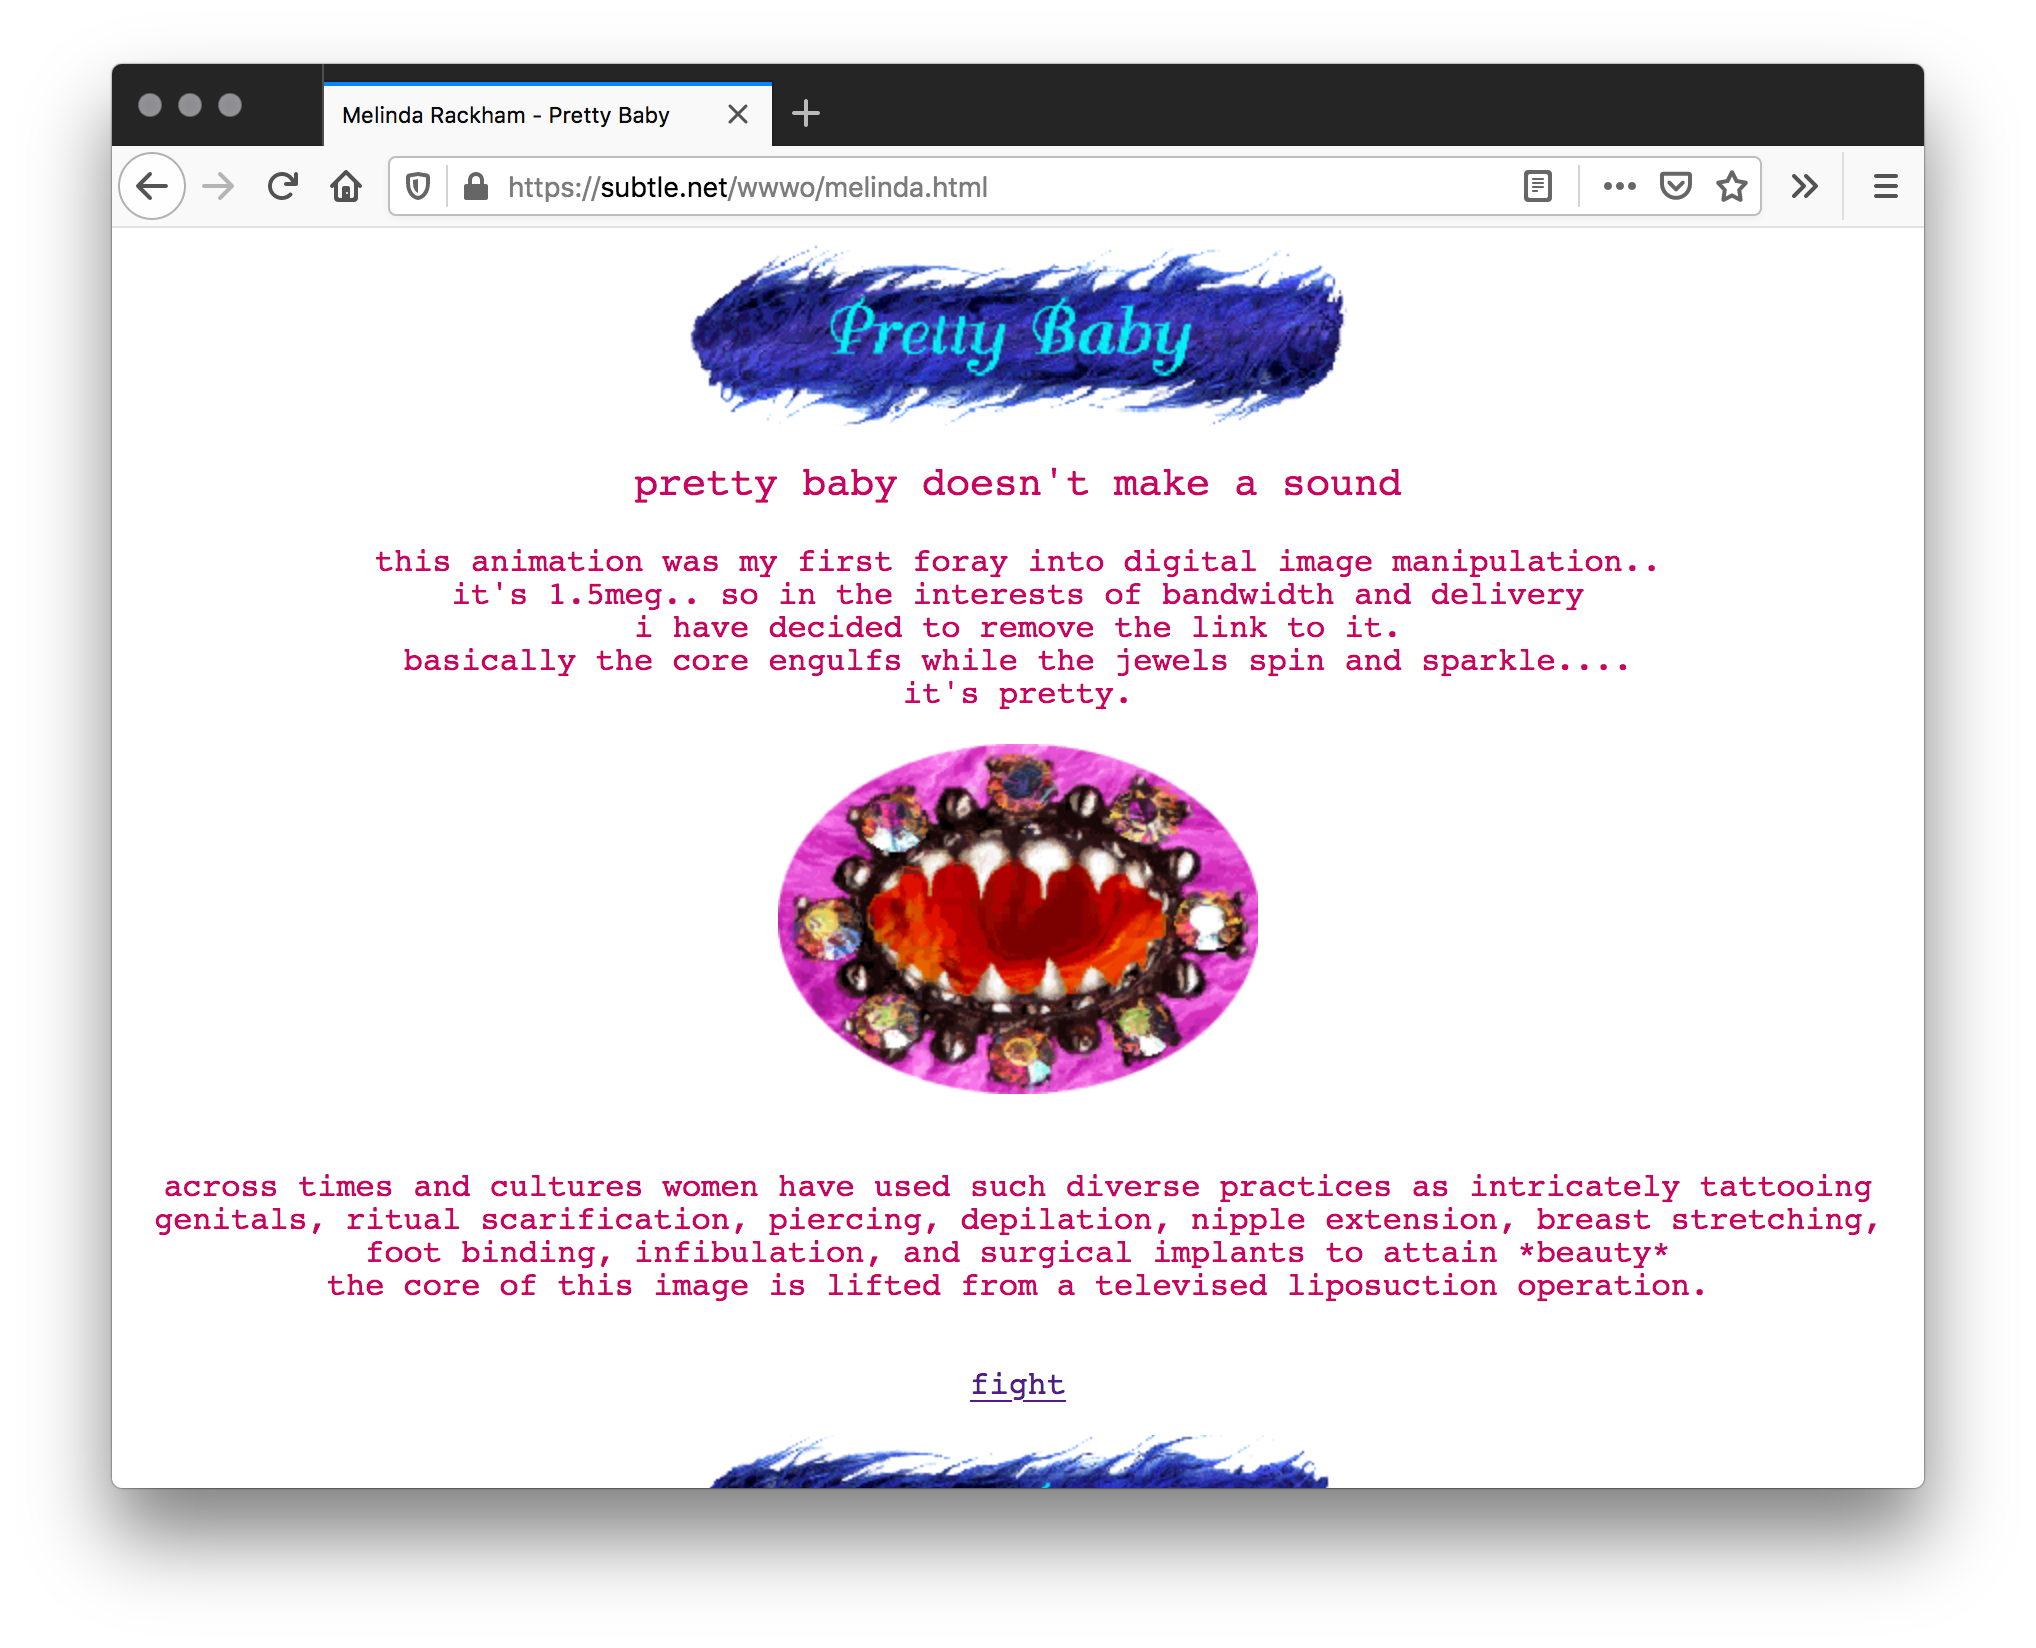 A white webpage with a blue furry header and "Pretty Baby" as the title and pink text. The center shows a circular pink graphic image of of an opened mouth with crystals along the edges and sharp white teeth inside.